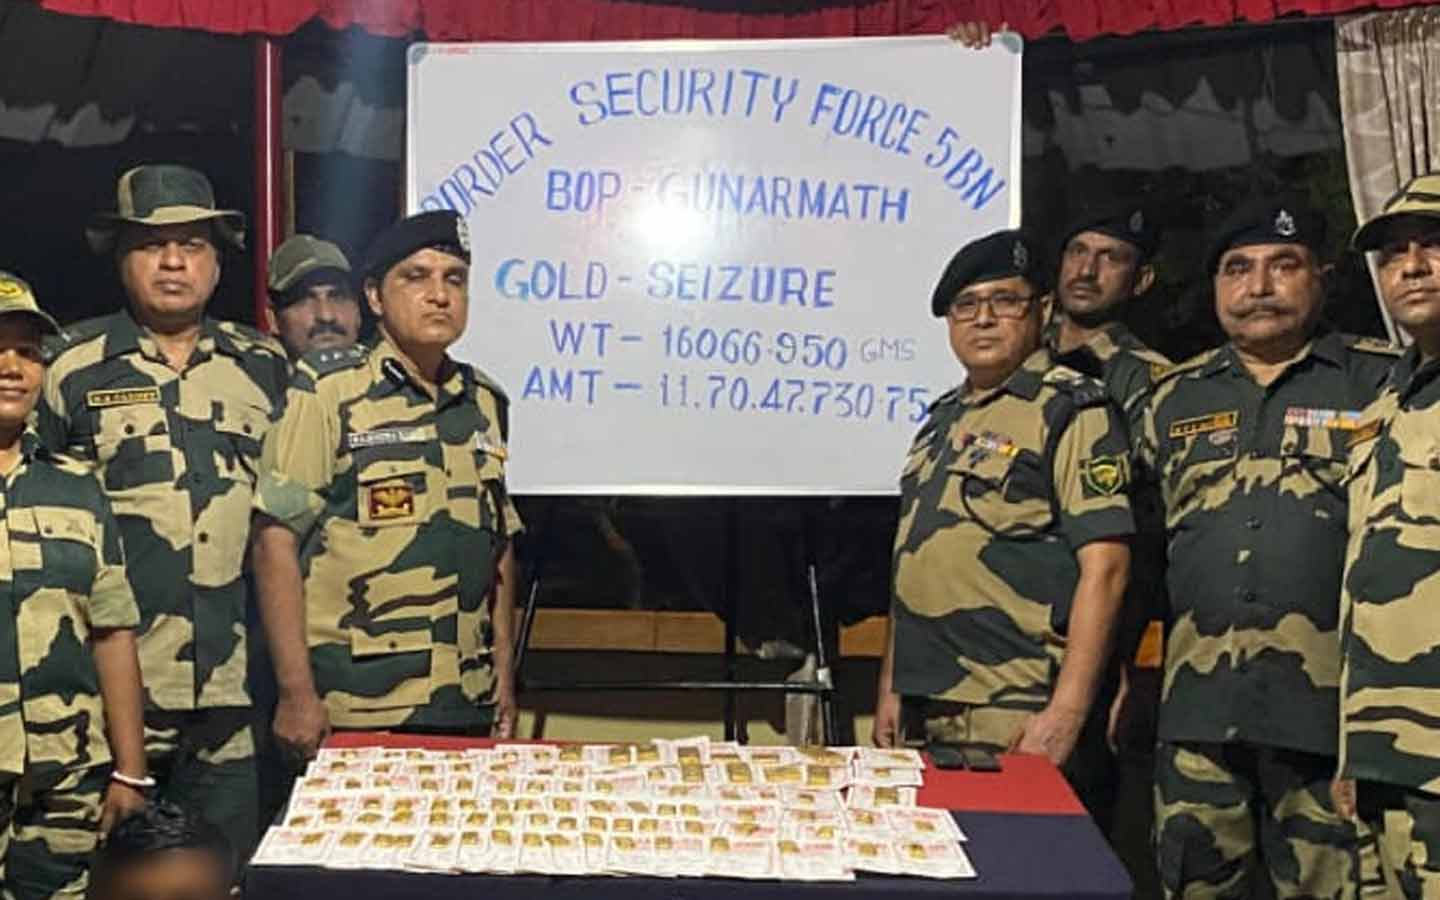 BSF seized golds worth 12 Crore from Bongaon Village